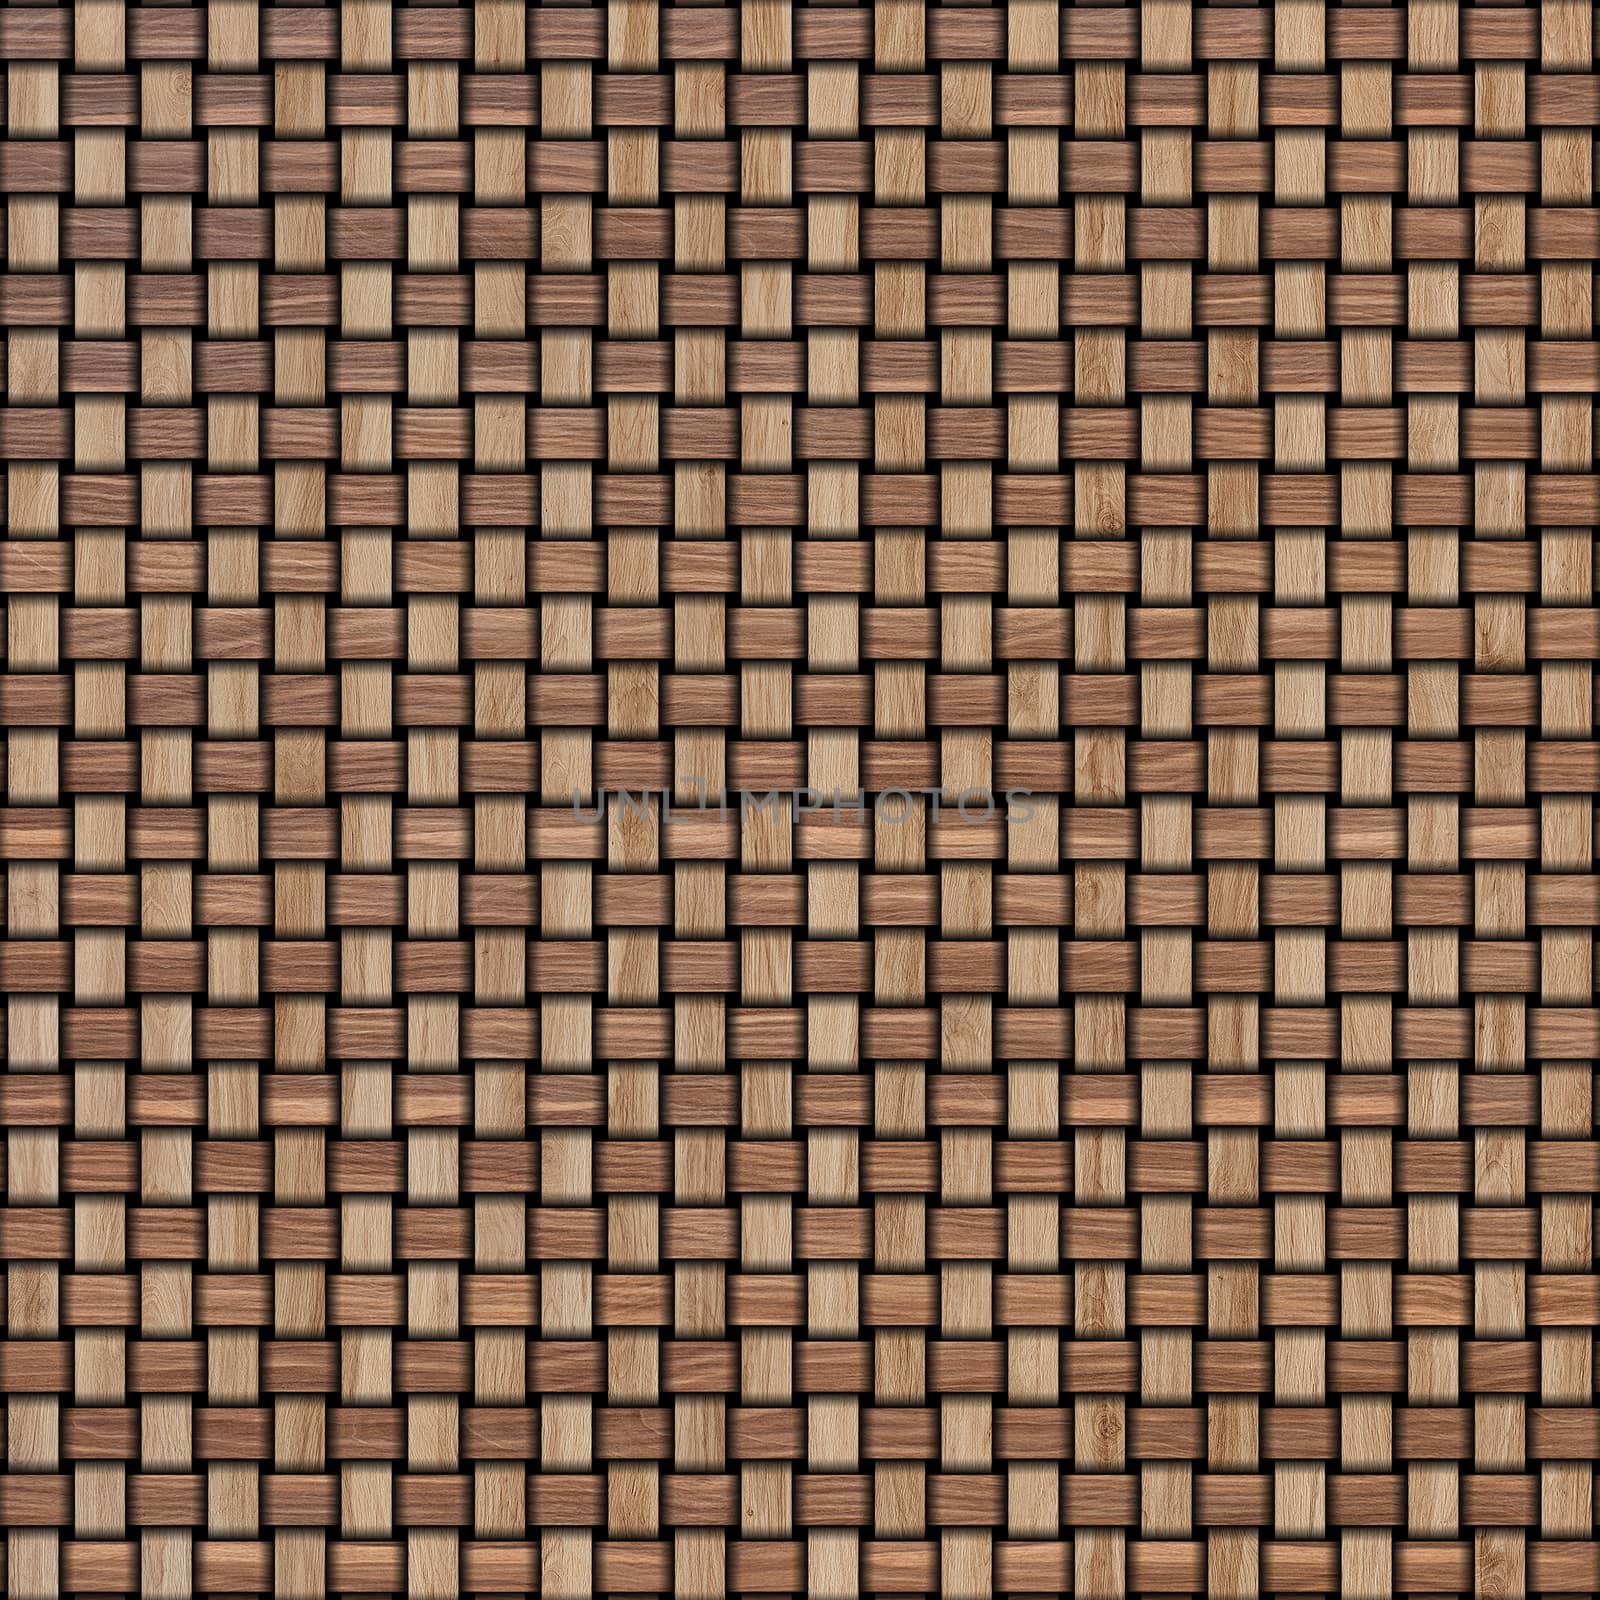 Wooden weave texture background. Abstract decorative wooden textured basket weaving background. Seamless pattern. by ivo_13